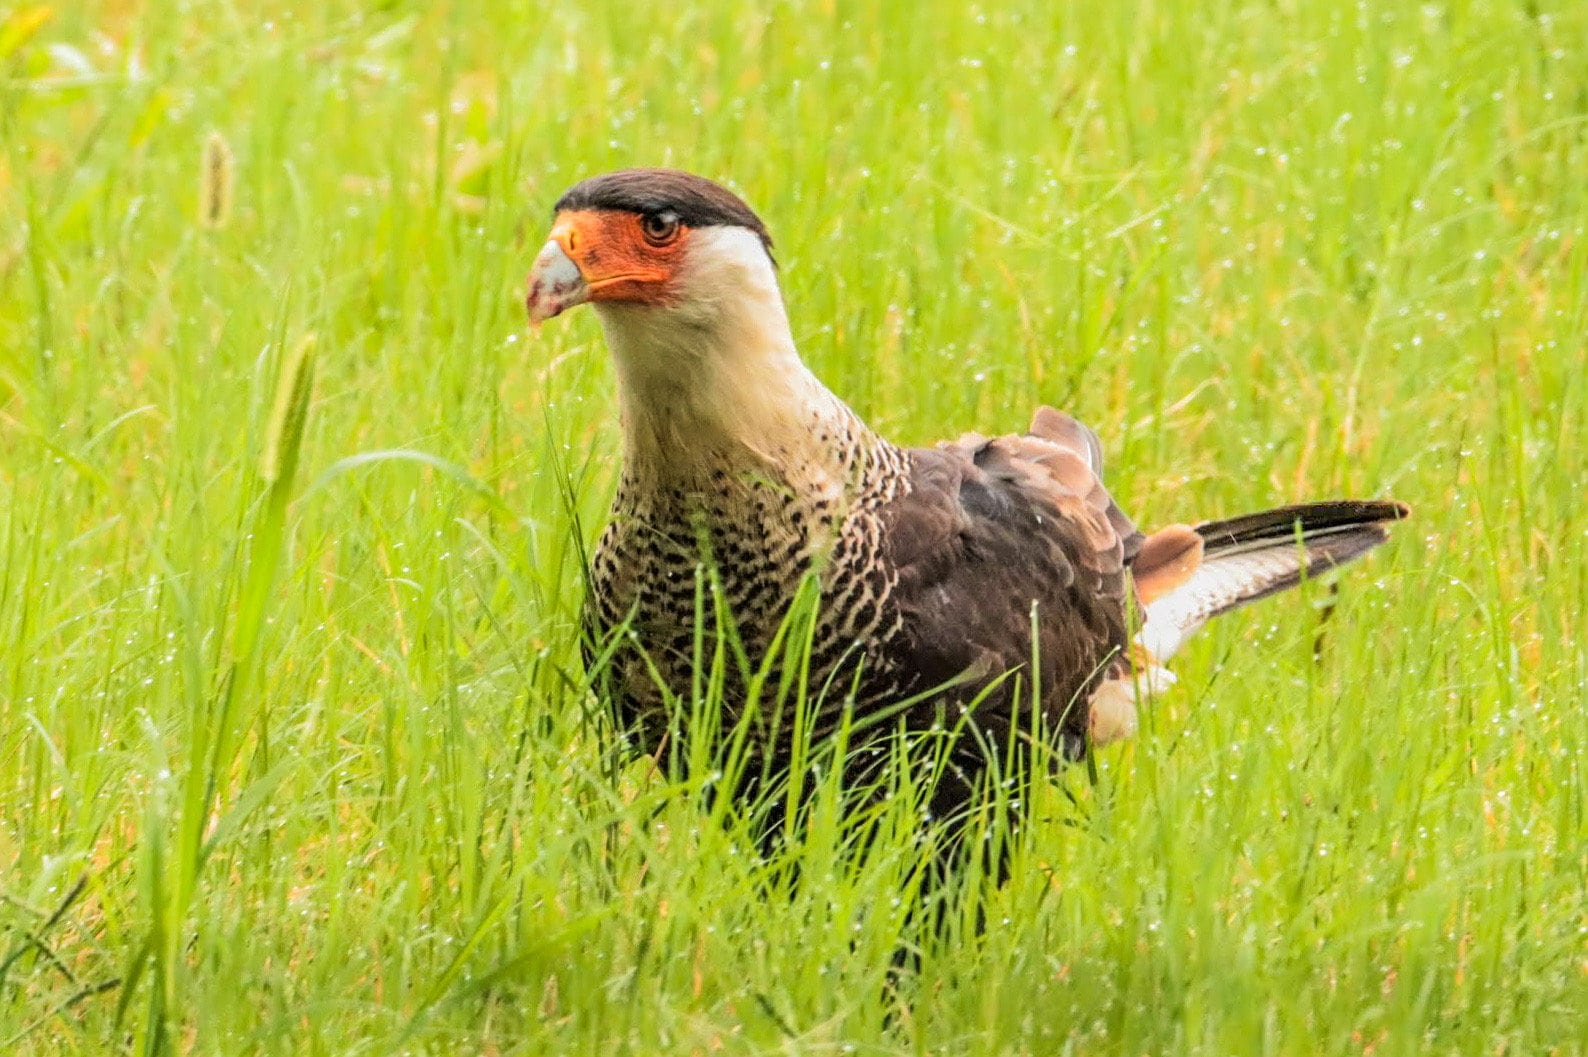 Species Highlight: The Crested Caracara